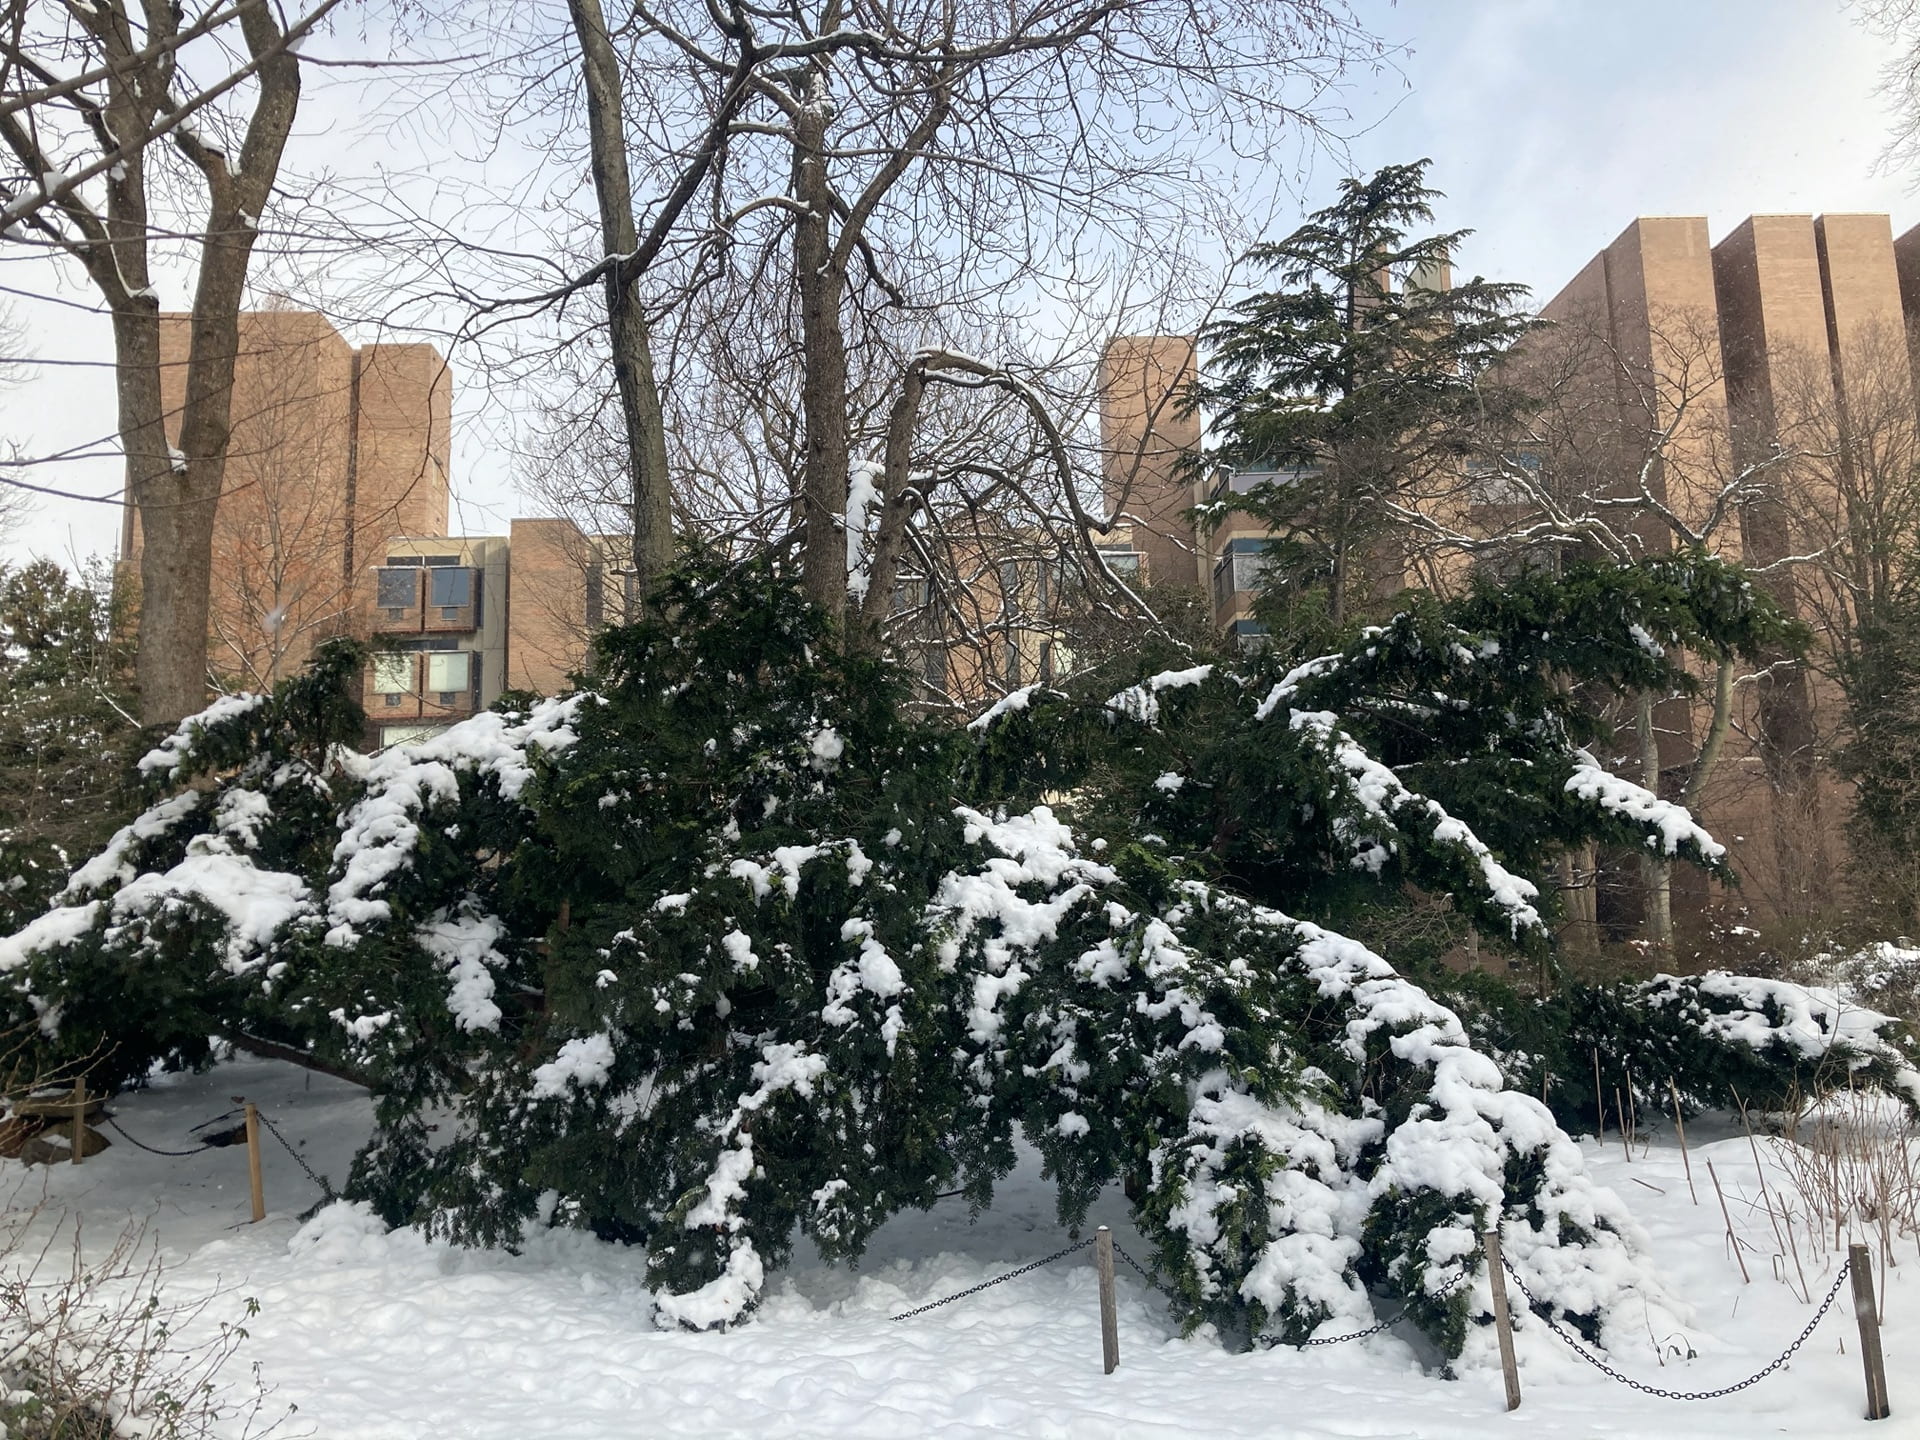 A snowy view of the Goddard Richards building designed by Louis Kahn, seen through the garden.